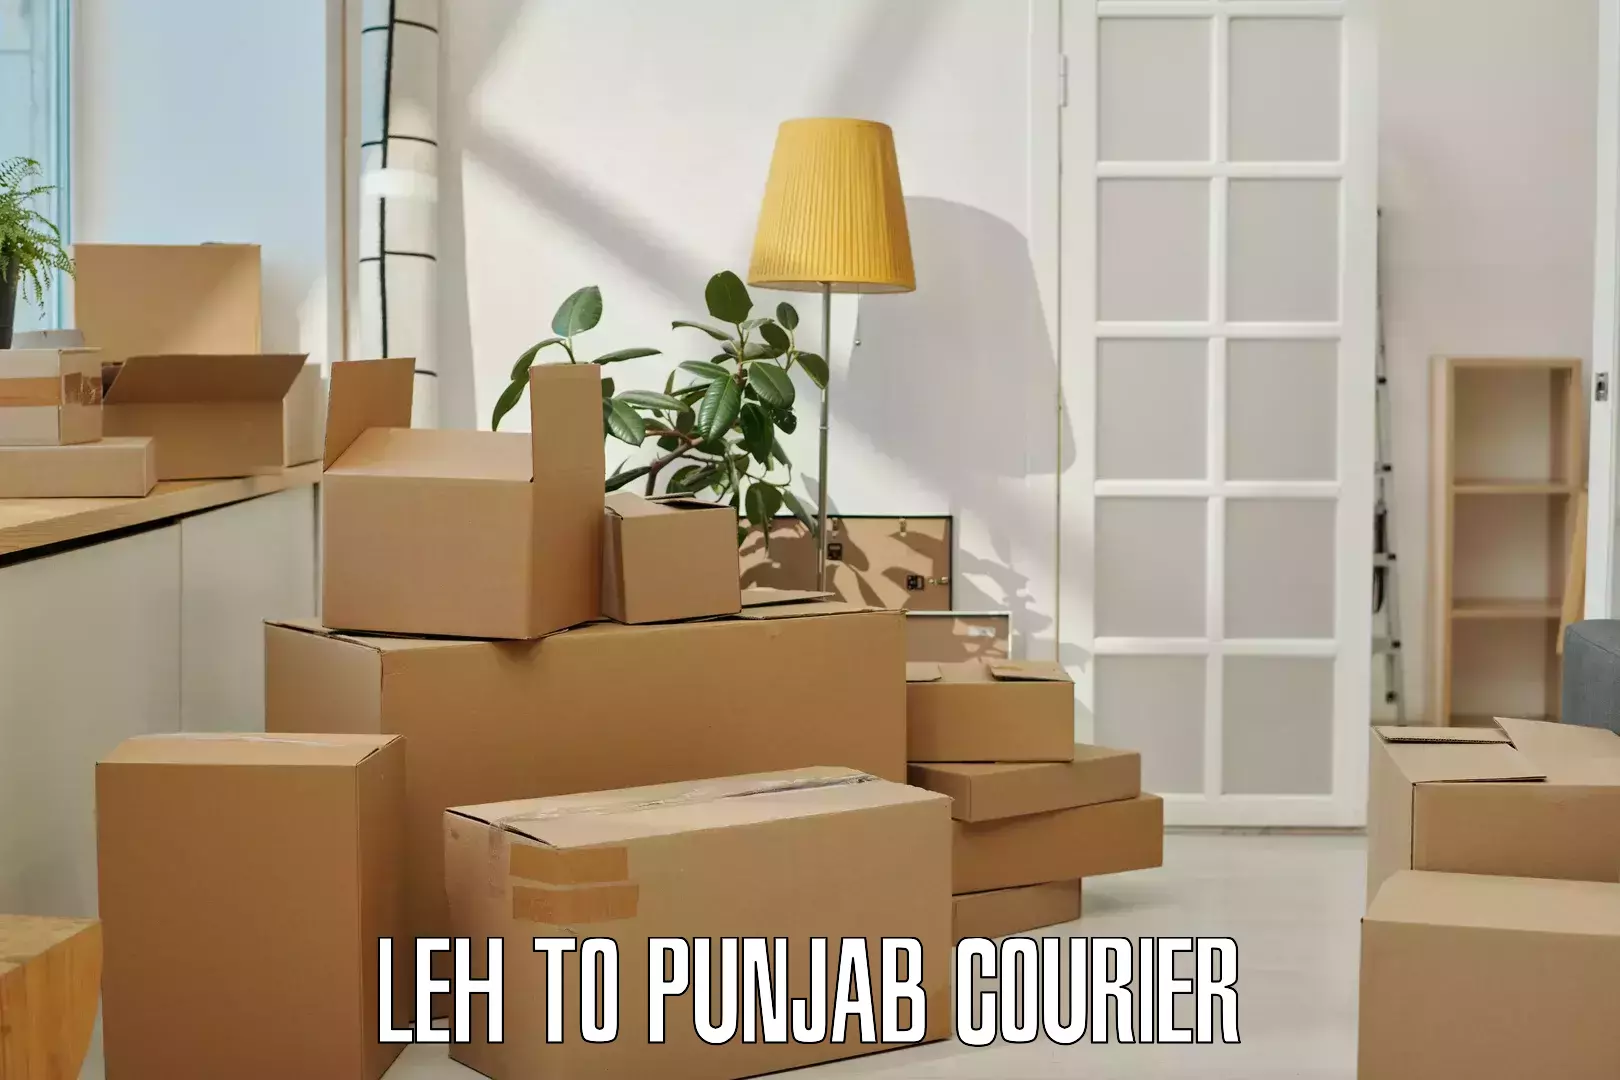 Multi-national courier services Leh to Goindwal Sahib